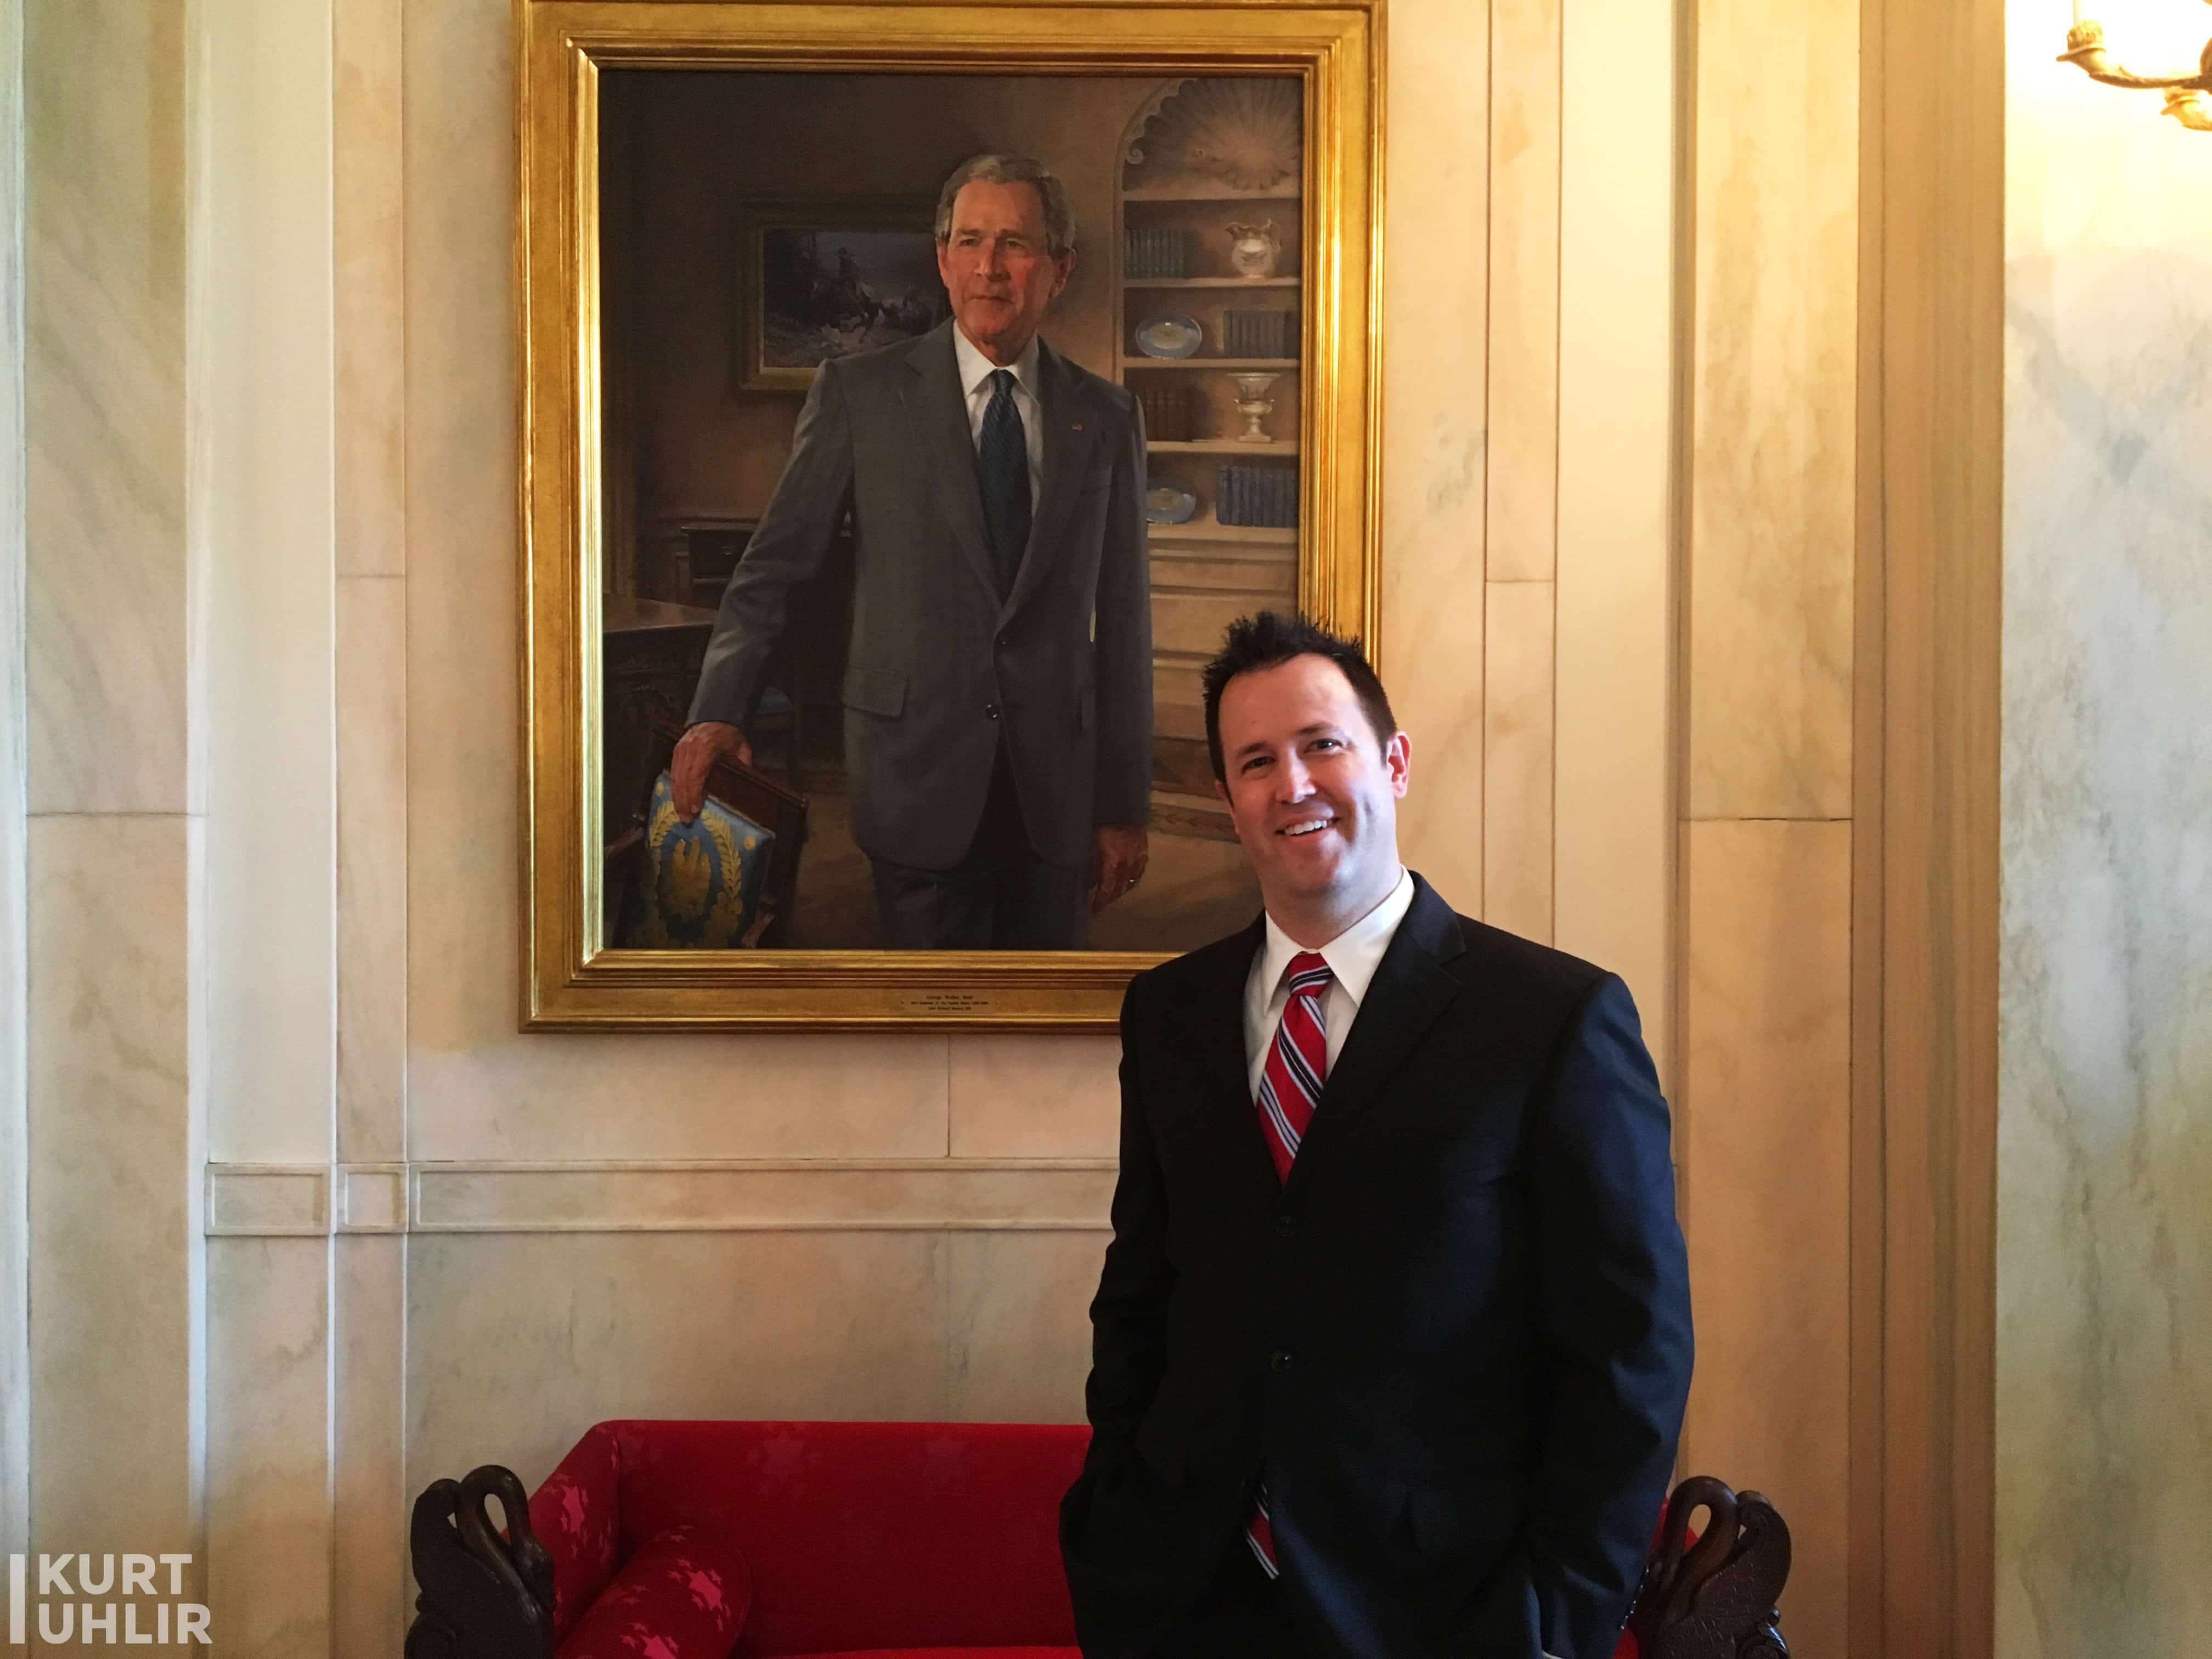 Kurt Uhlir hanging with GW (well a painting of him) in Entrance Hall in the residence of The White House.